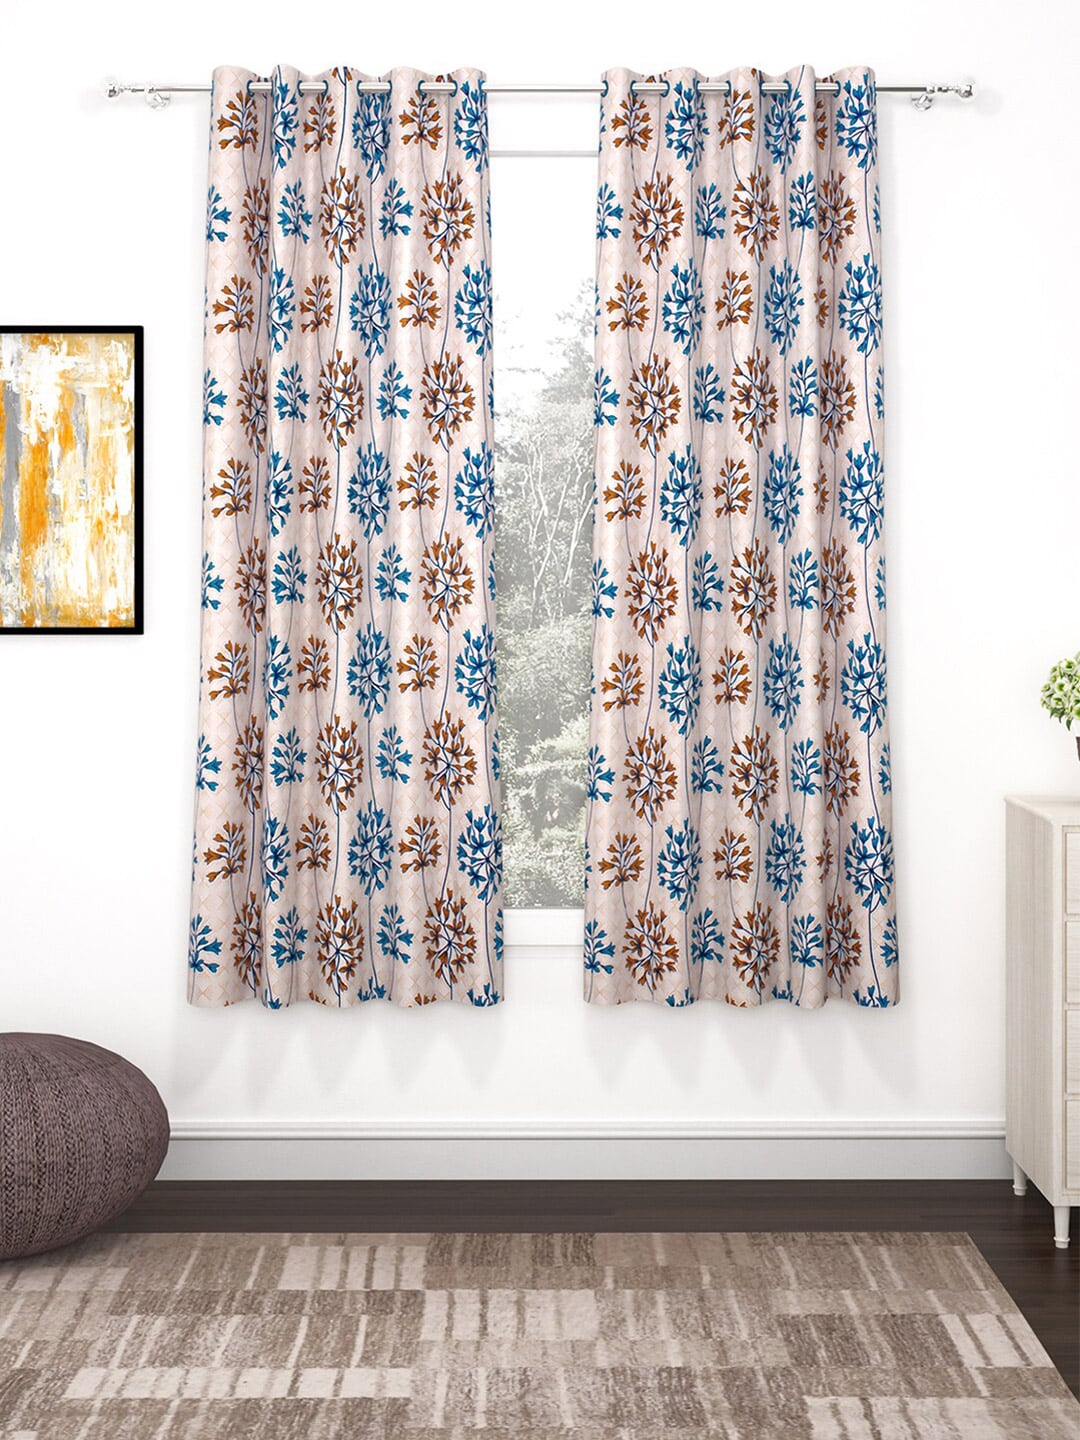 Bedspun Cream & Blue Set of 2 Printed Polyester Eyelet Ringtop Window Curtains Price in India